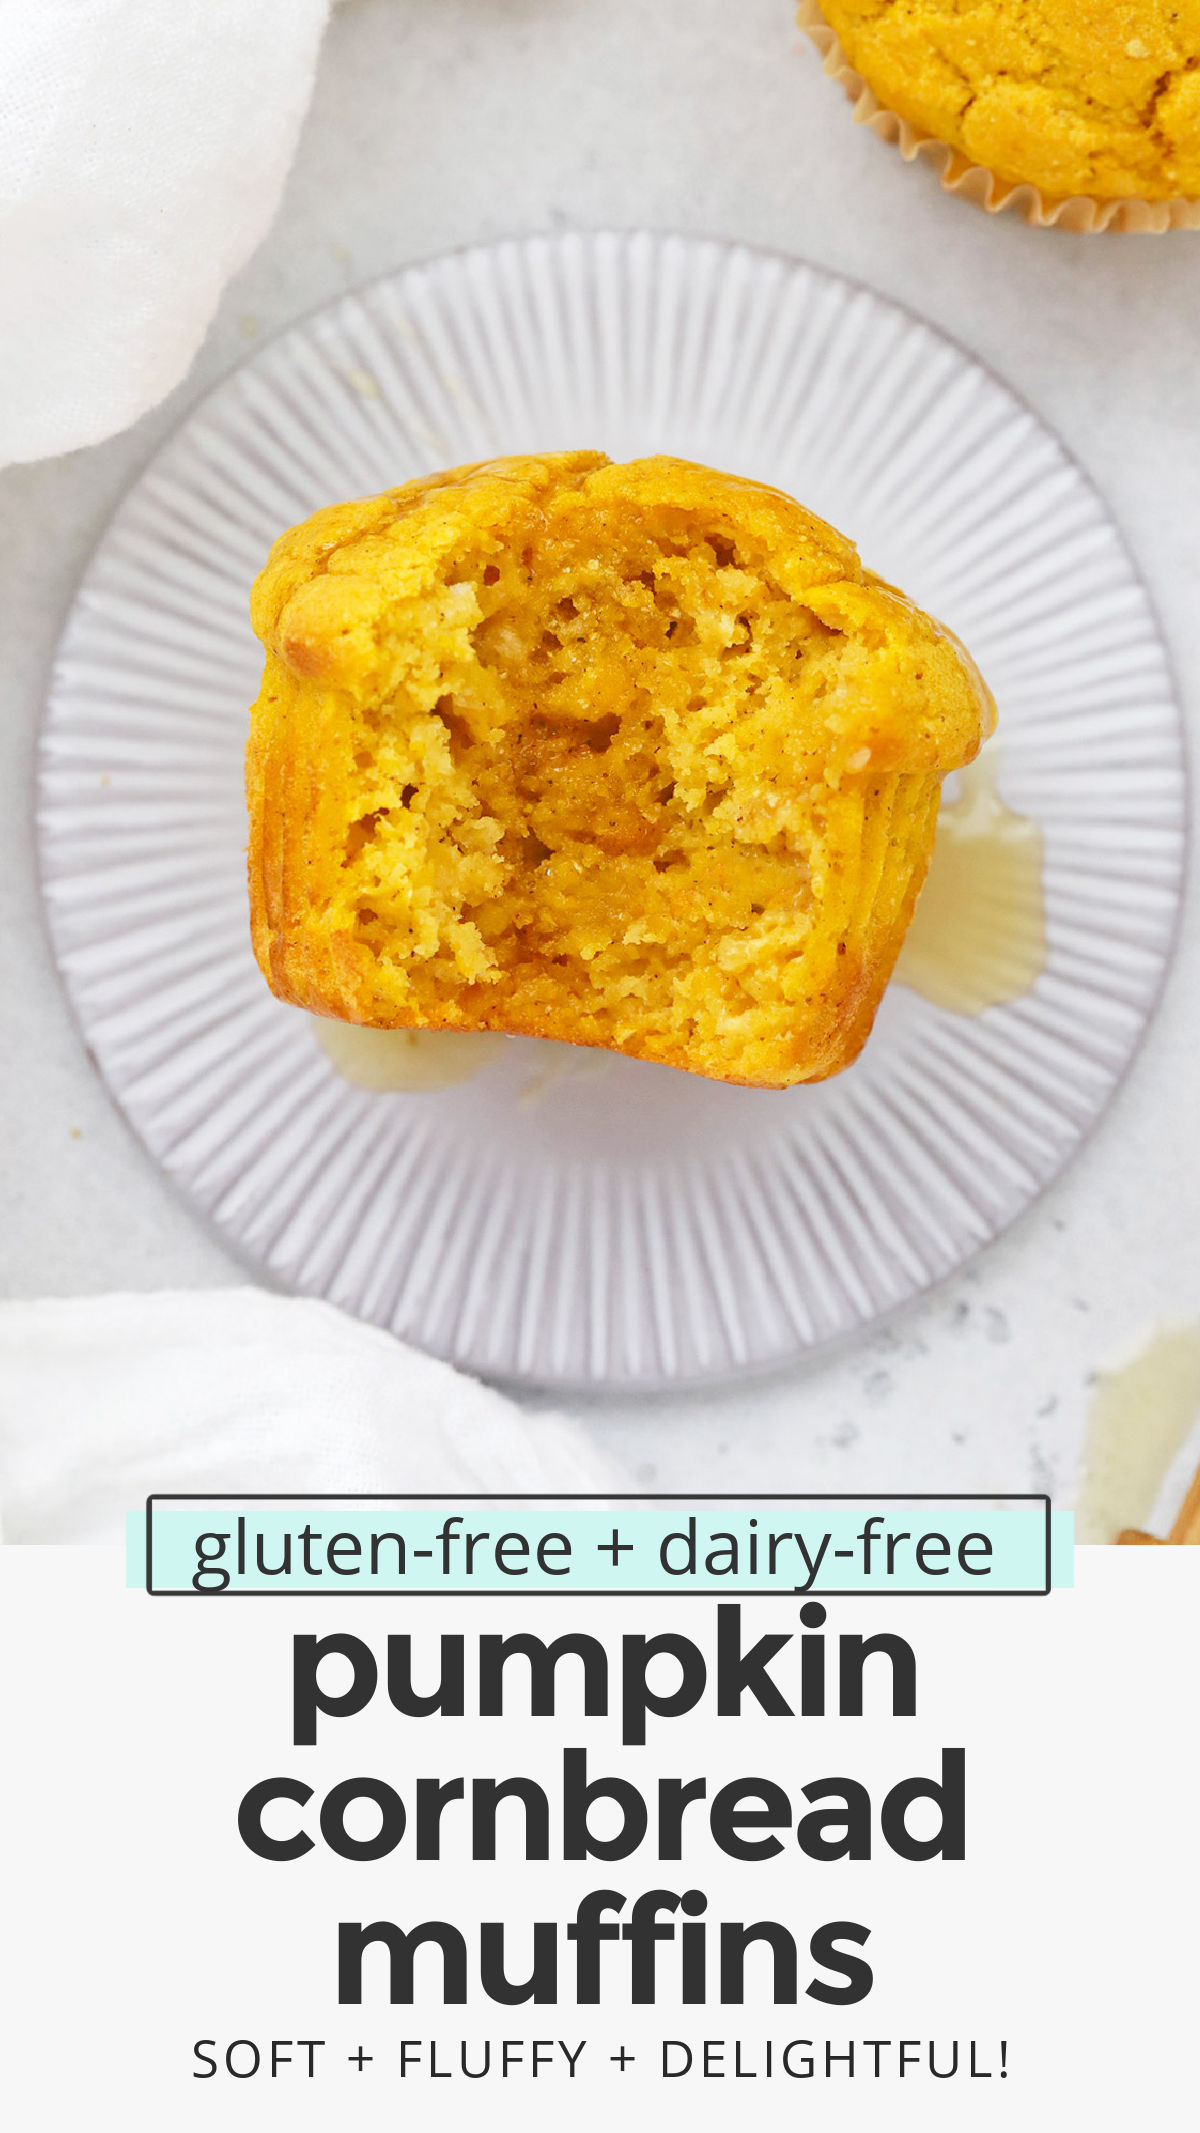 Gluten-Free Pumpkin Cornbread Muffins - These light, fluffy pumpkin cornbread muffins are an all-time favorite. The perfect cozy accompaniment to chilis, soups, salads, and more! (Gluten & Dairy Free) // cornbread muffins // gluten free cornbread muffins // pumpkin cornbread recipe // #glutenfree #dairyfree #cornbread #cornbreadmuffins #pumpkin #pumpkinmuffins